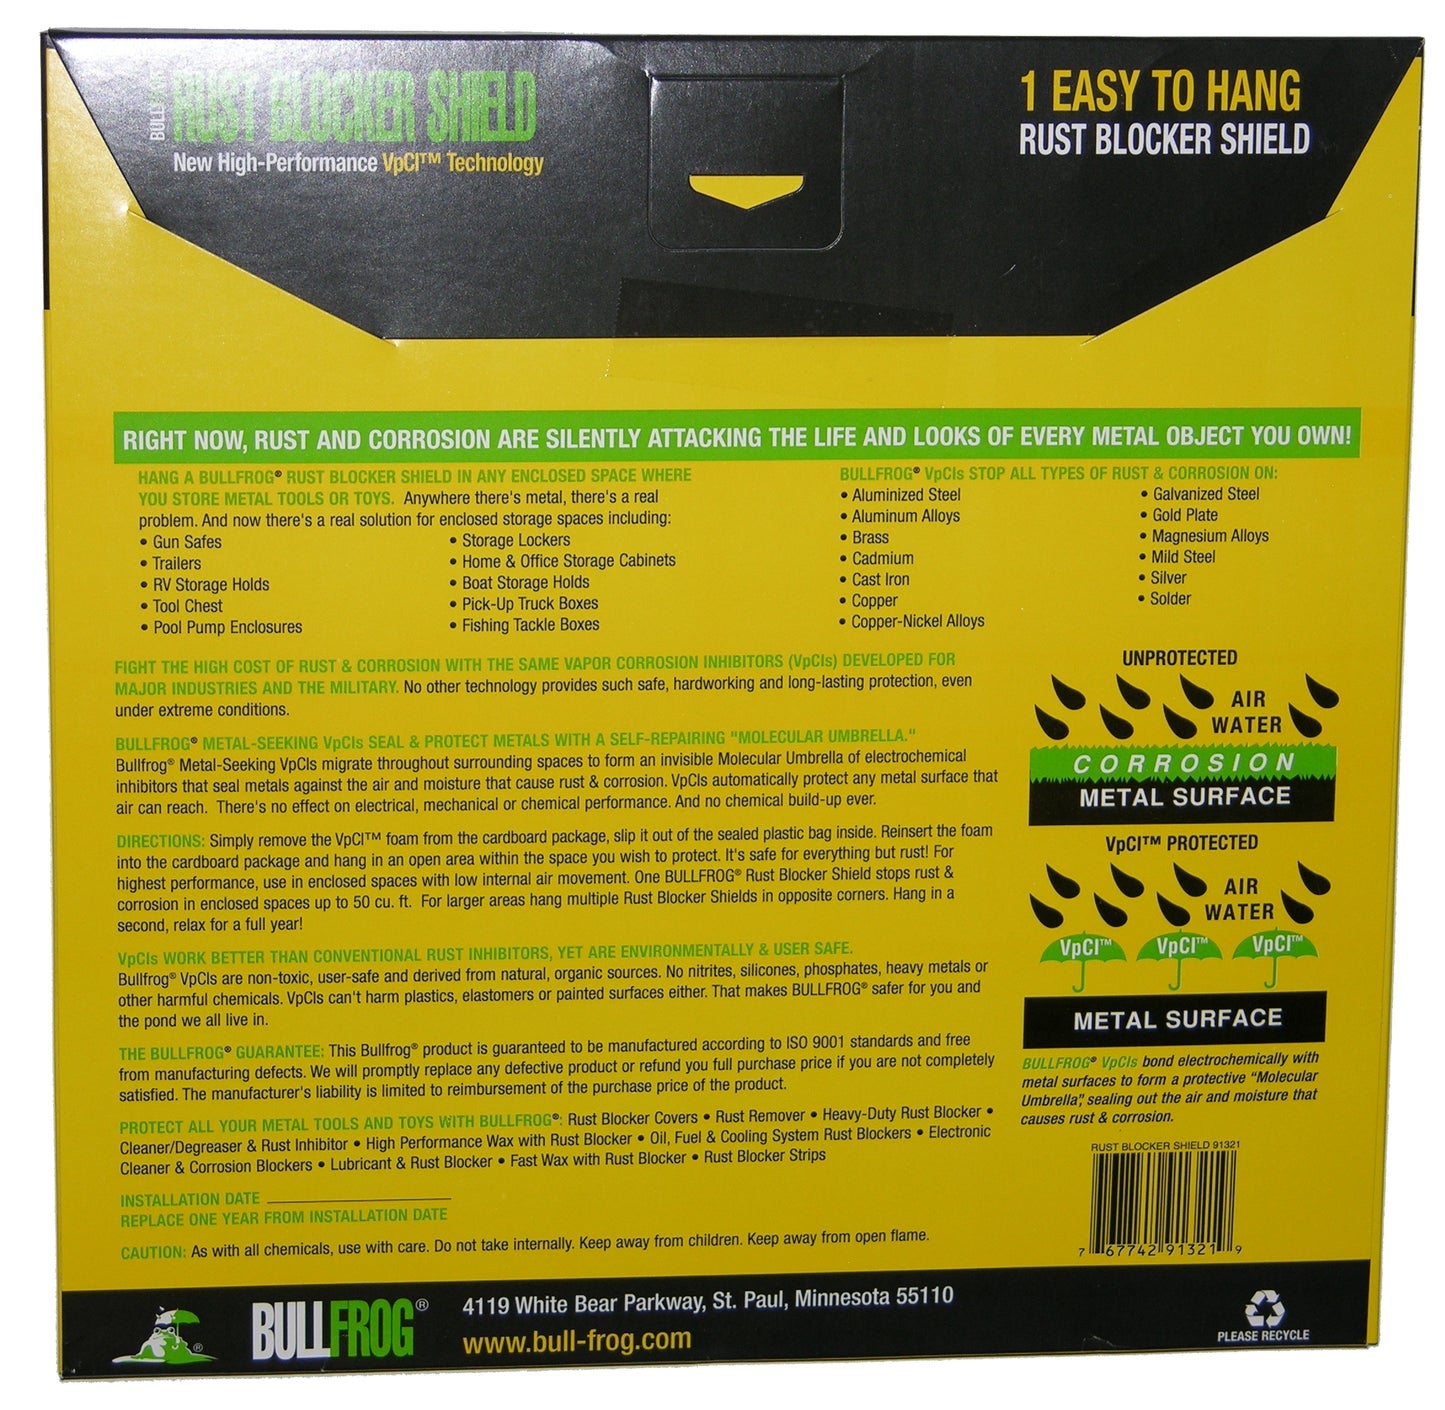 Bull Frog 91321 Rust Blocker Emitter Shield Protects up to 50 Cu Ft Enclosed Space